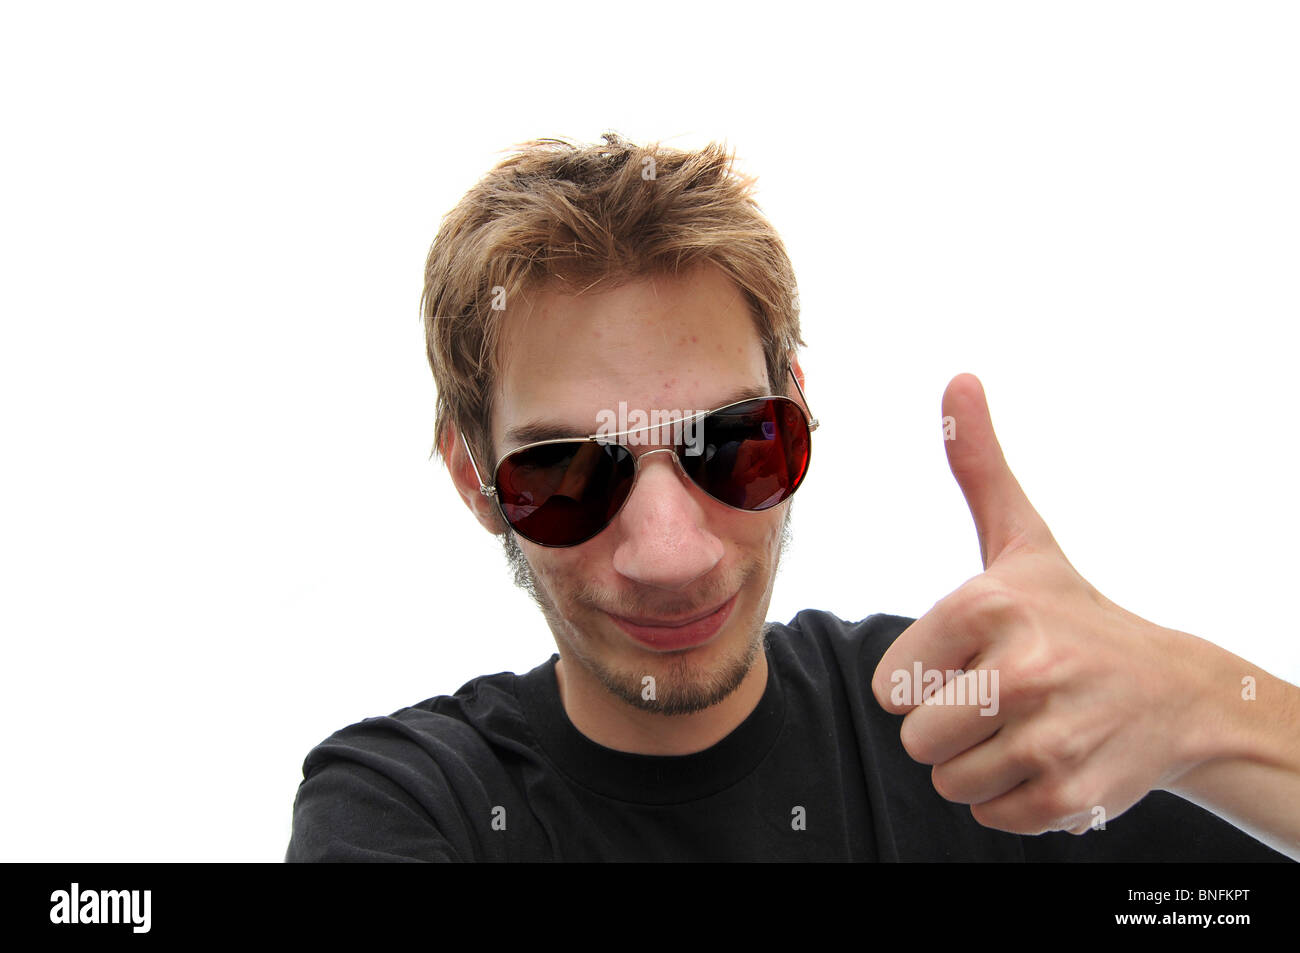 young-man-giving-a-reassuring-smile-wearing-aviator-sunglasses-isolated-BNFKPT.jpg